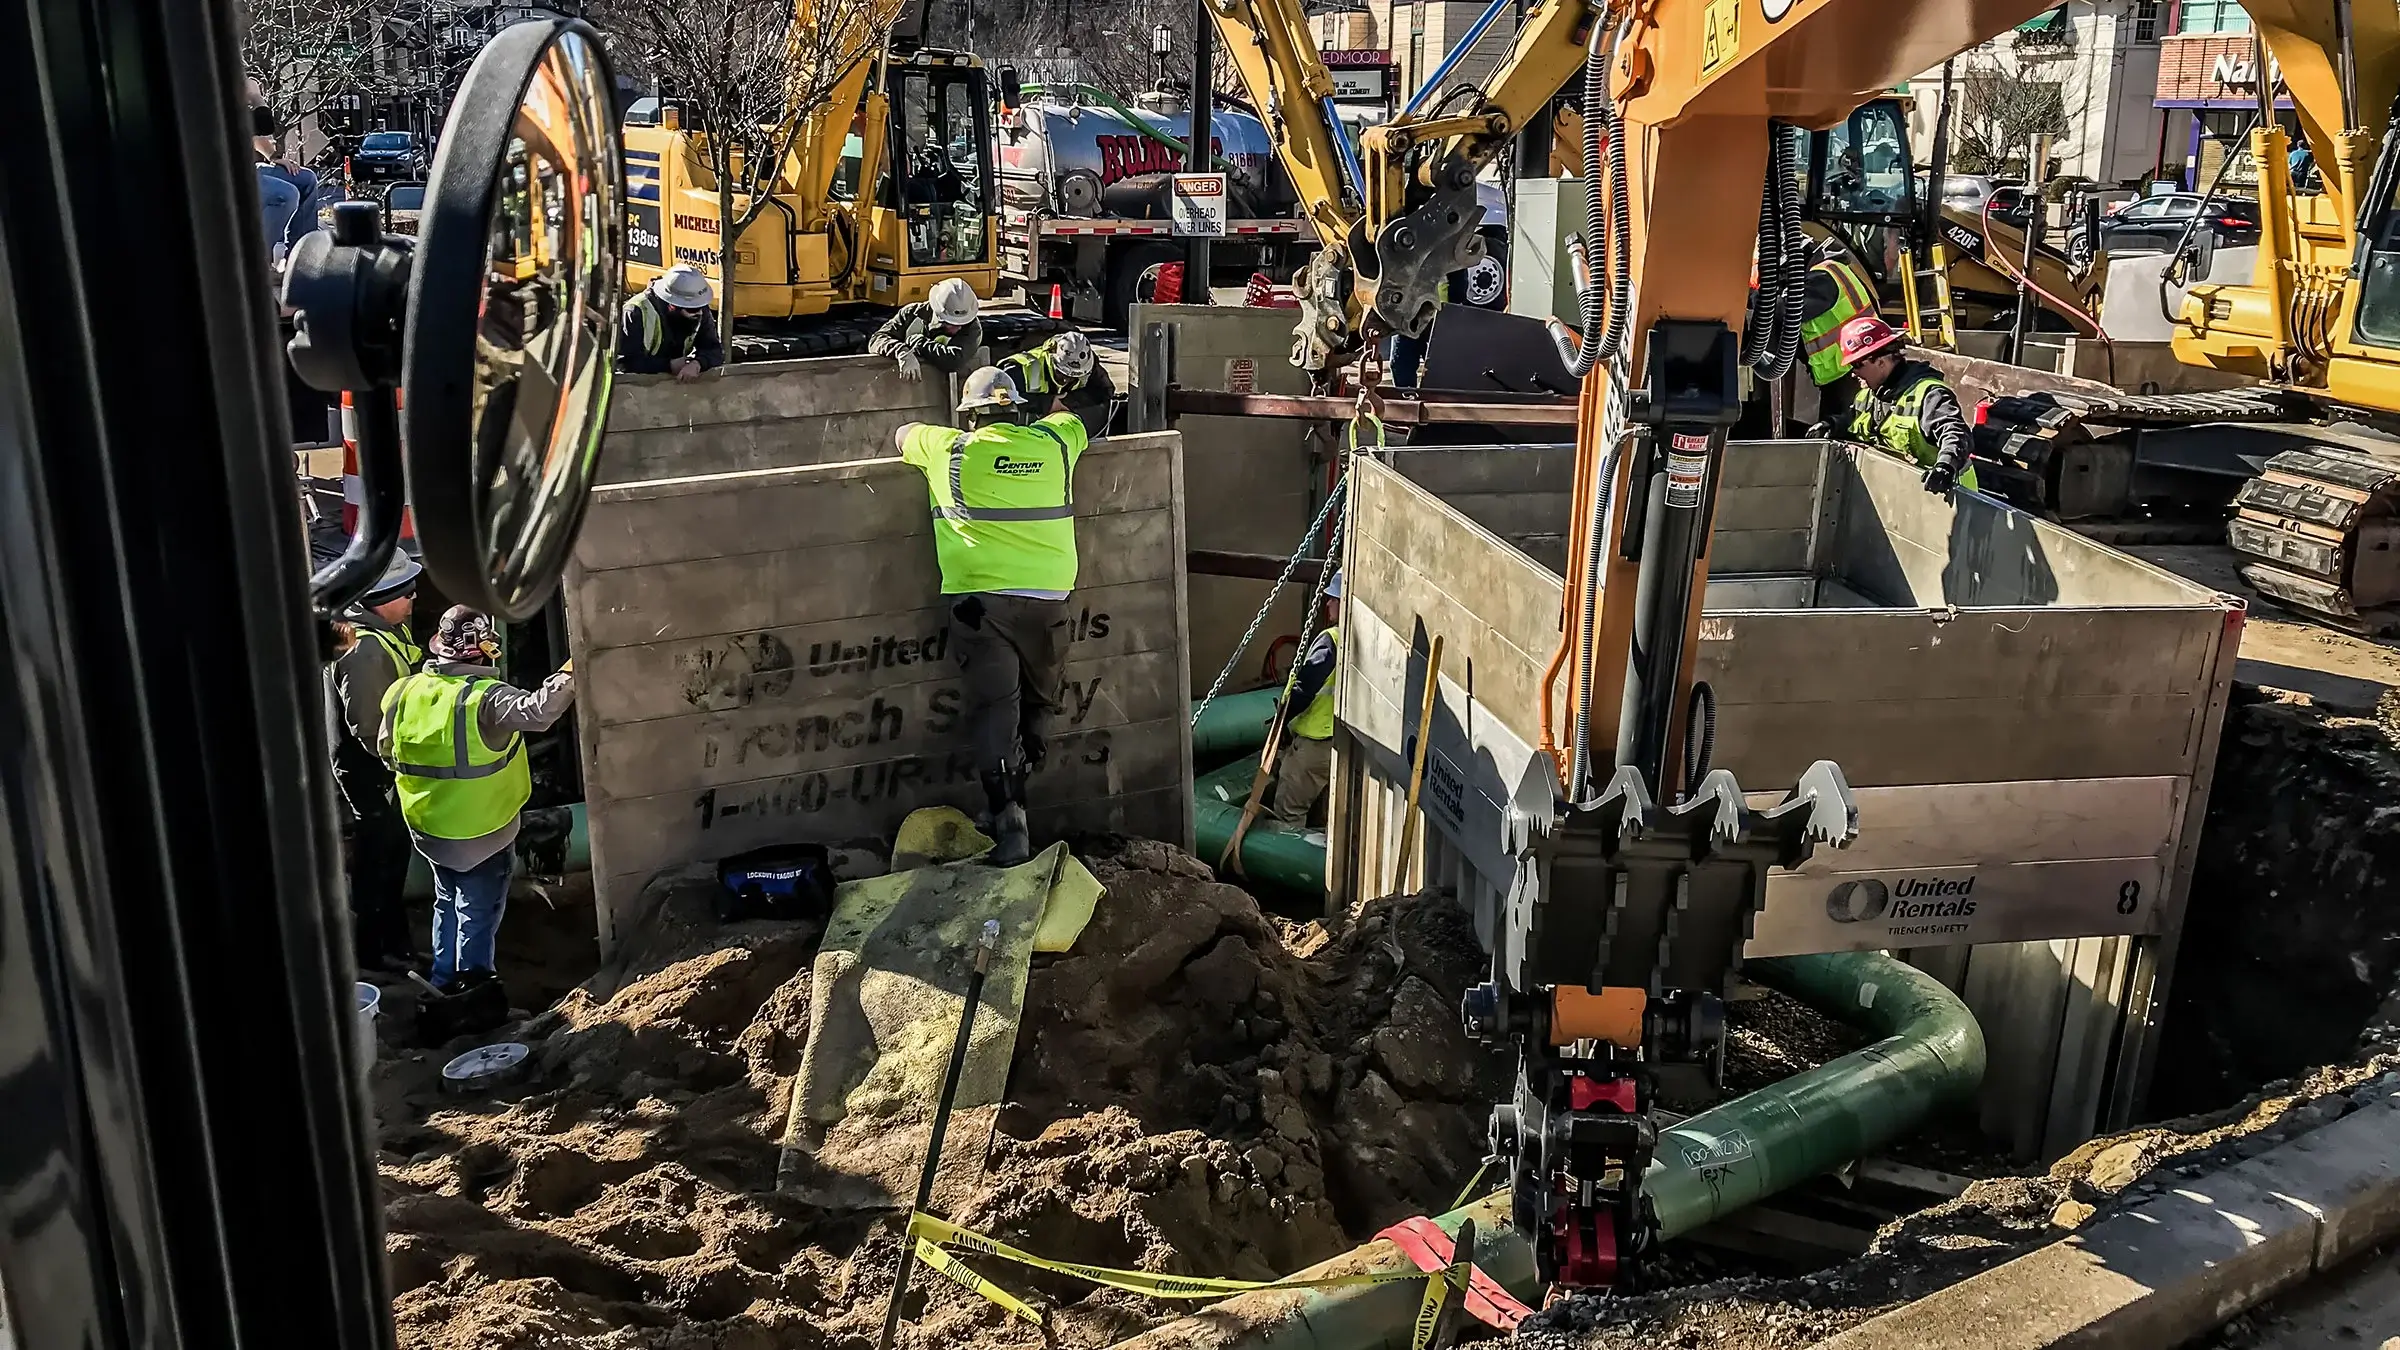 Several trenches being installed in a busy urban environment